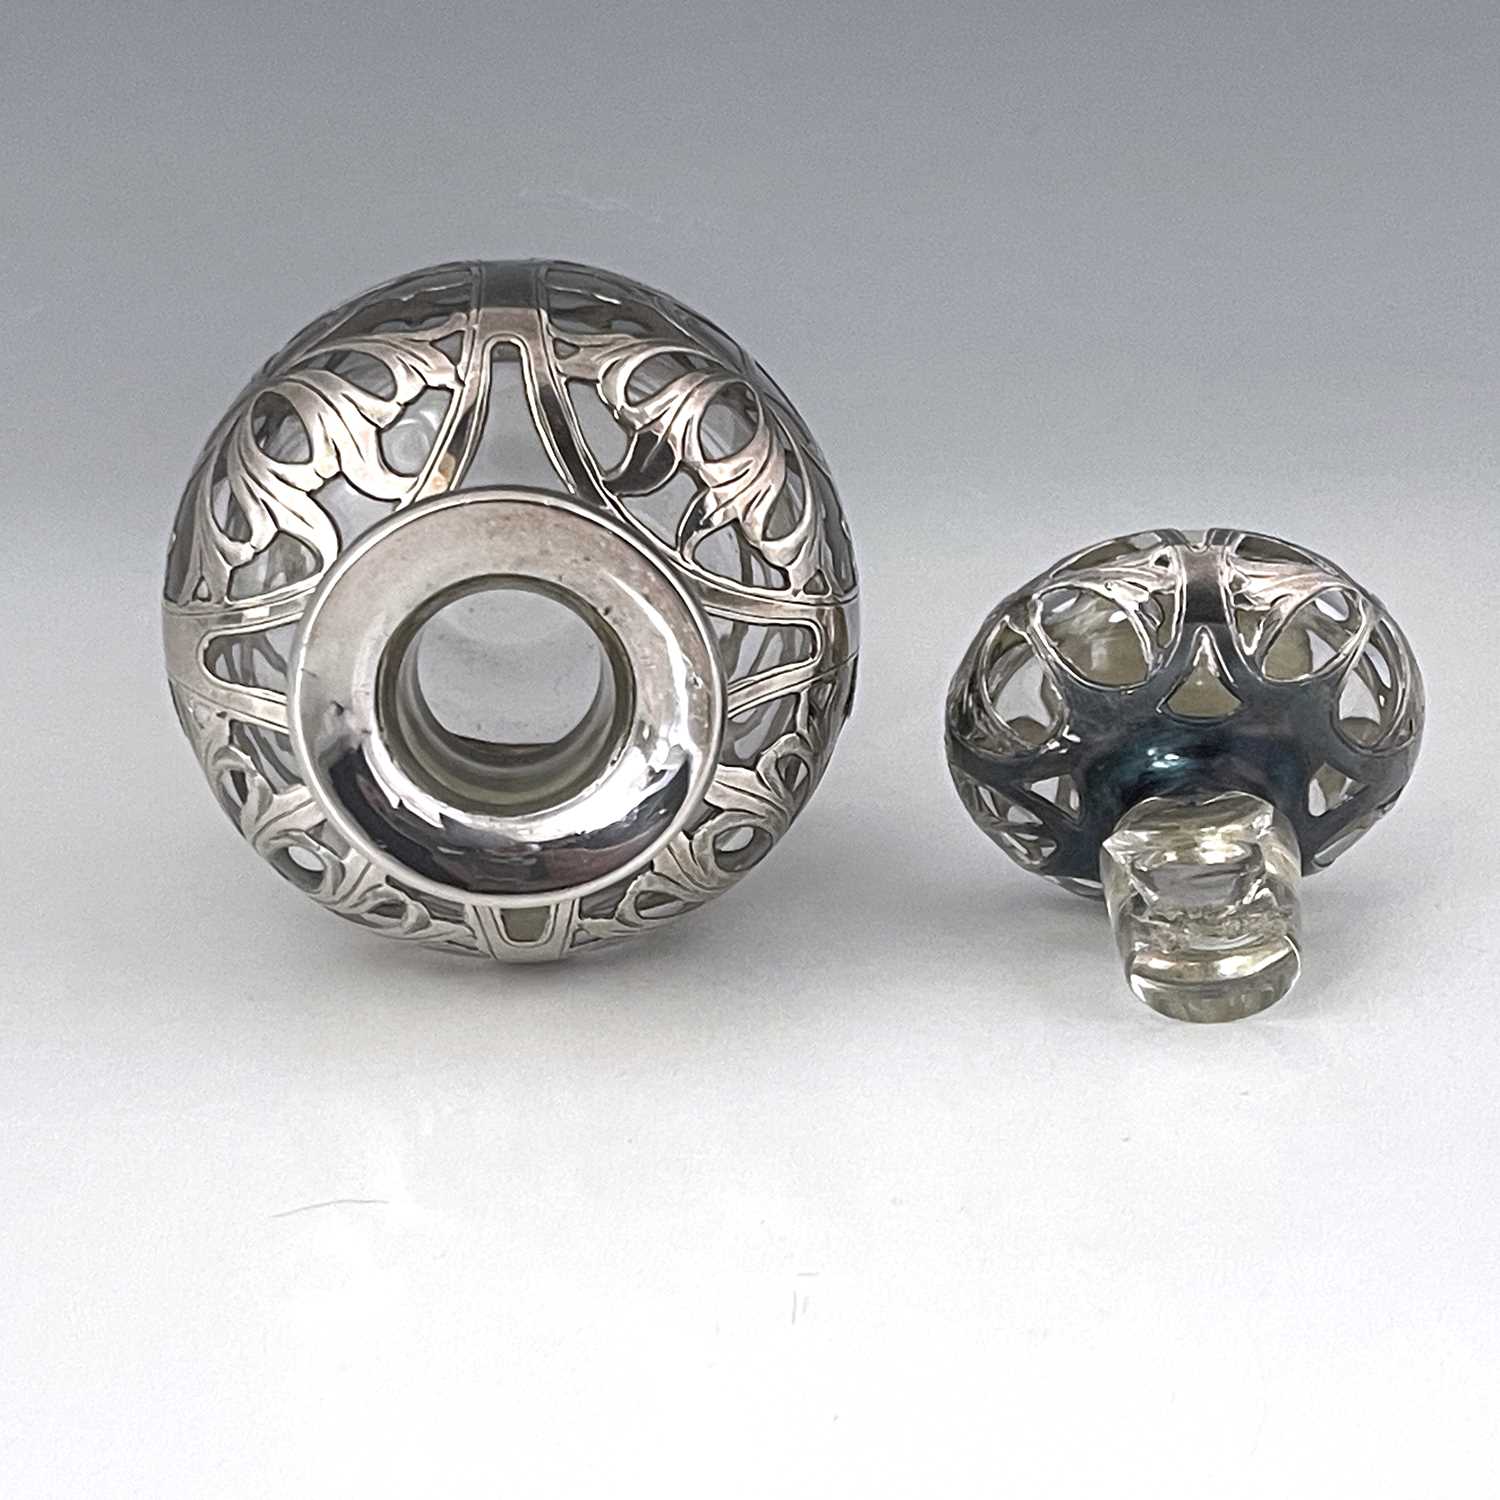 An American Art Nouveau silver overlay glass perfume bottle and stopper, ovoid form, chased with - Image 4 of 5